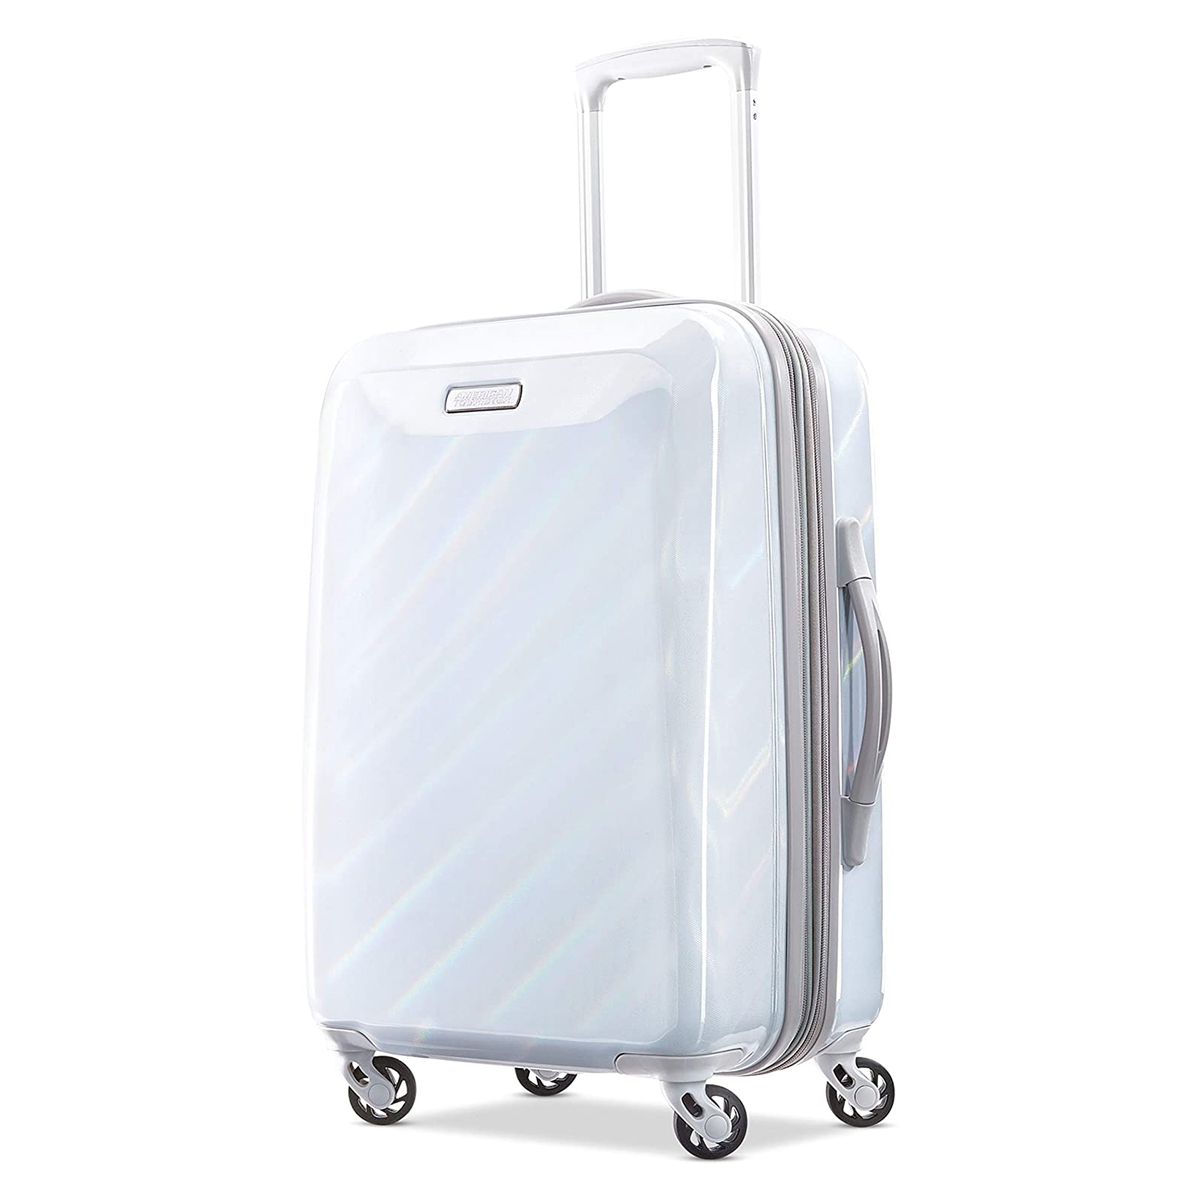 American Tourister Moonlight Hardside Expandable Luggage with Spinner Wheels